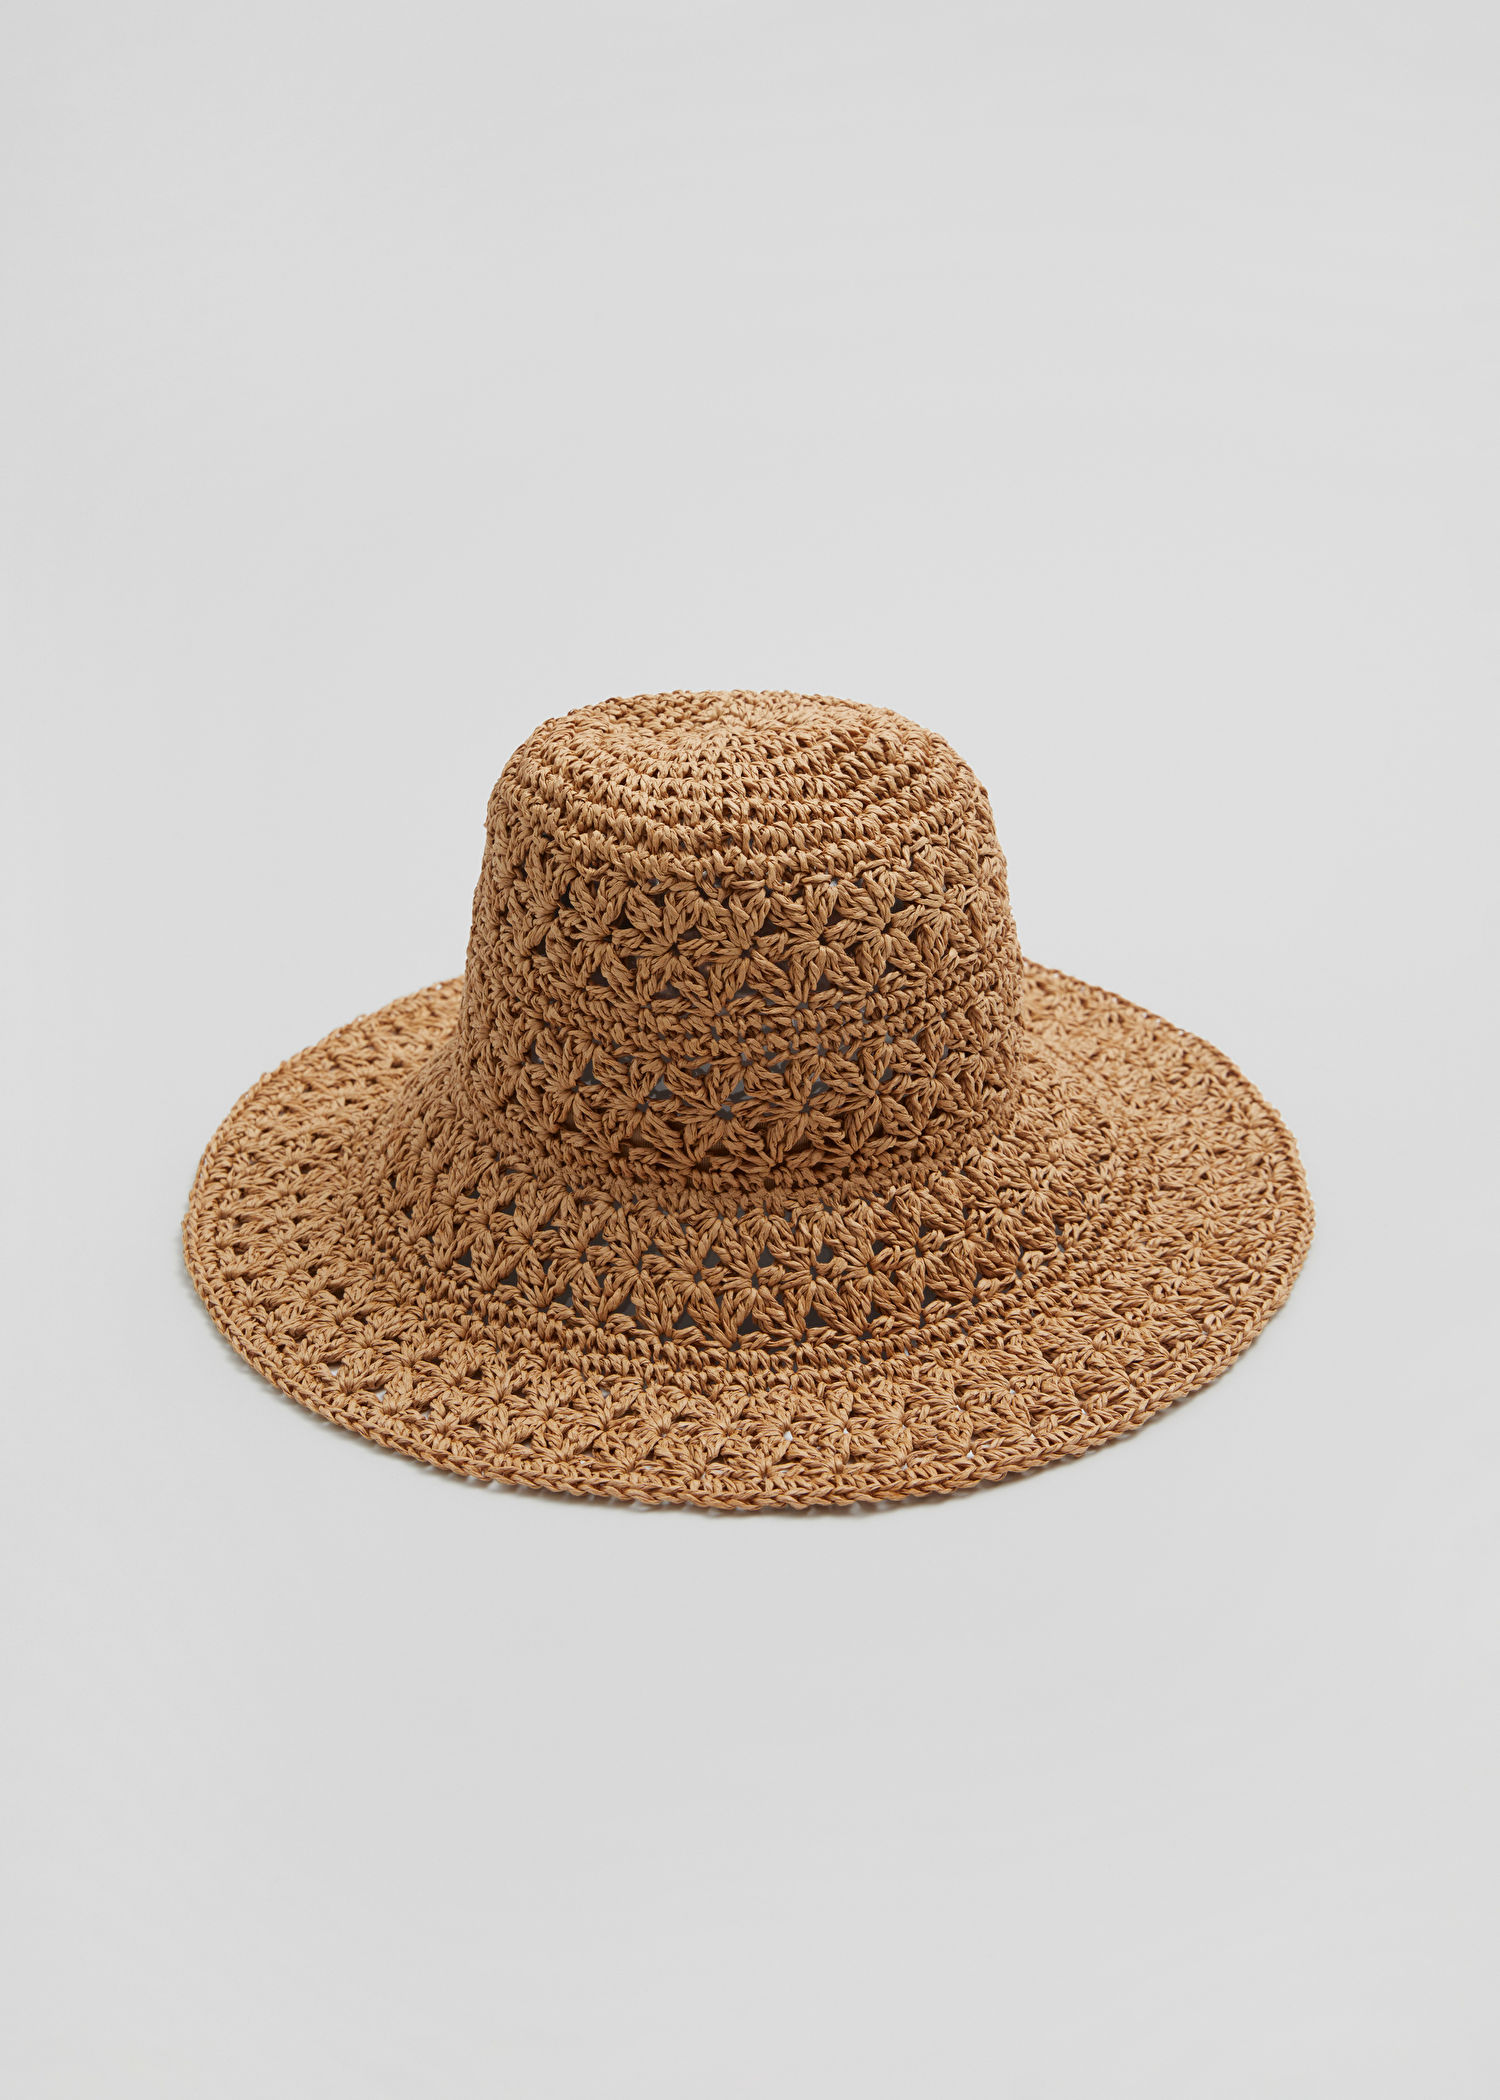 & Other Stories + Crochet Straw Hat